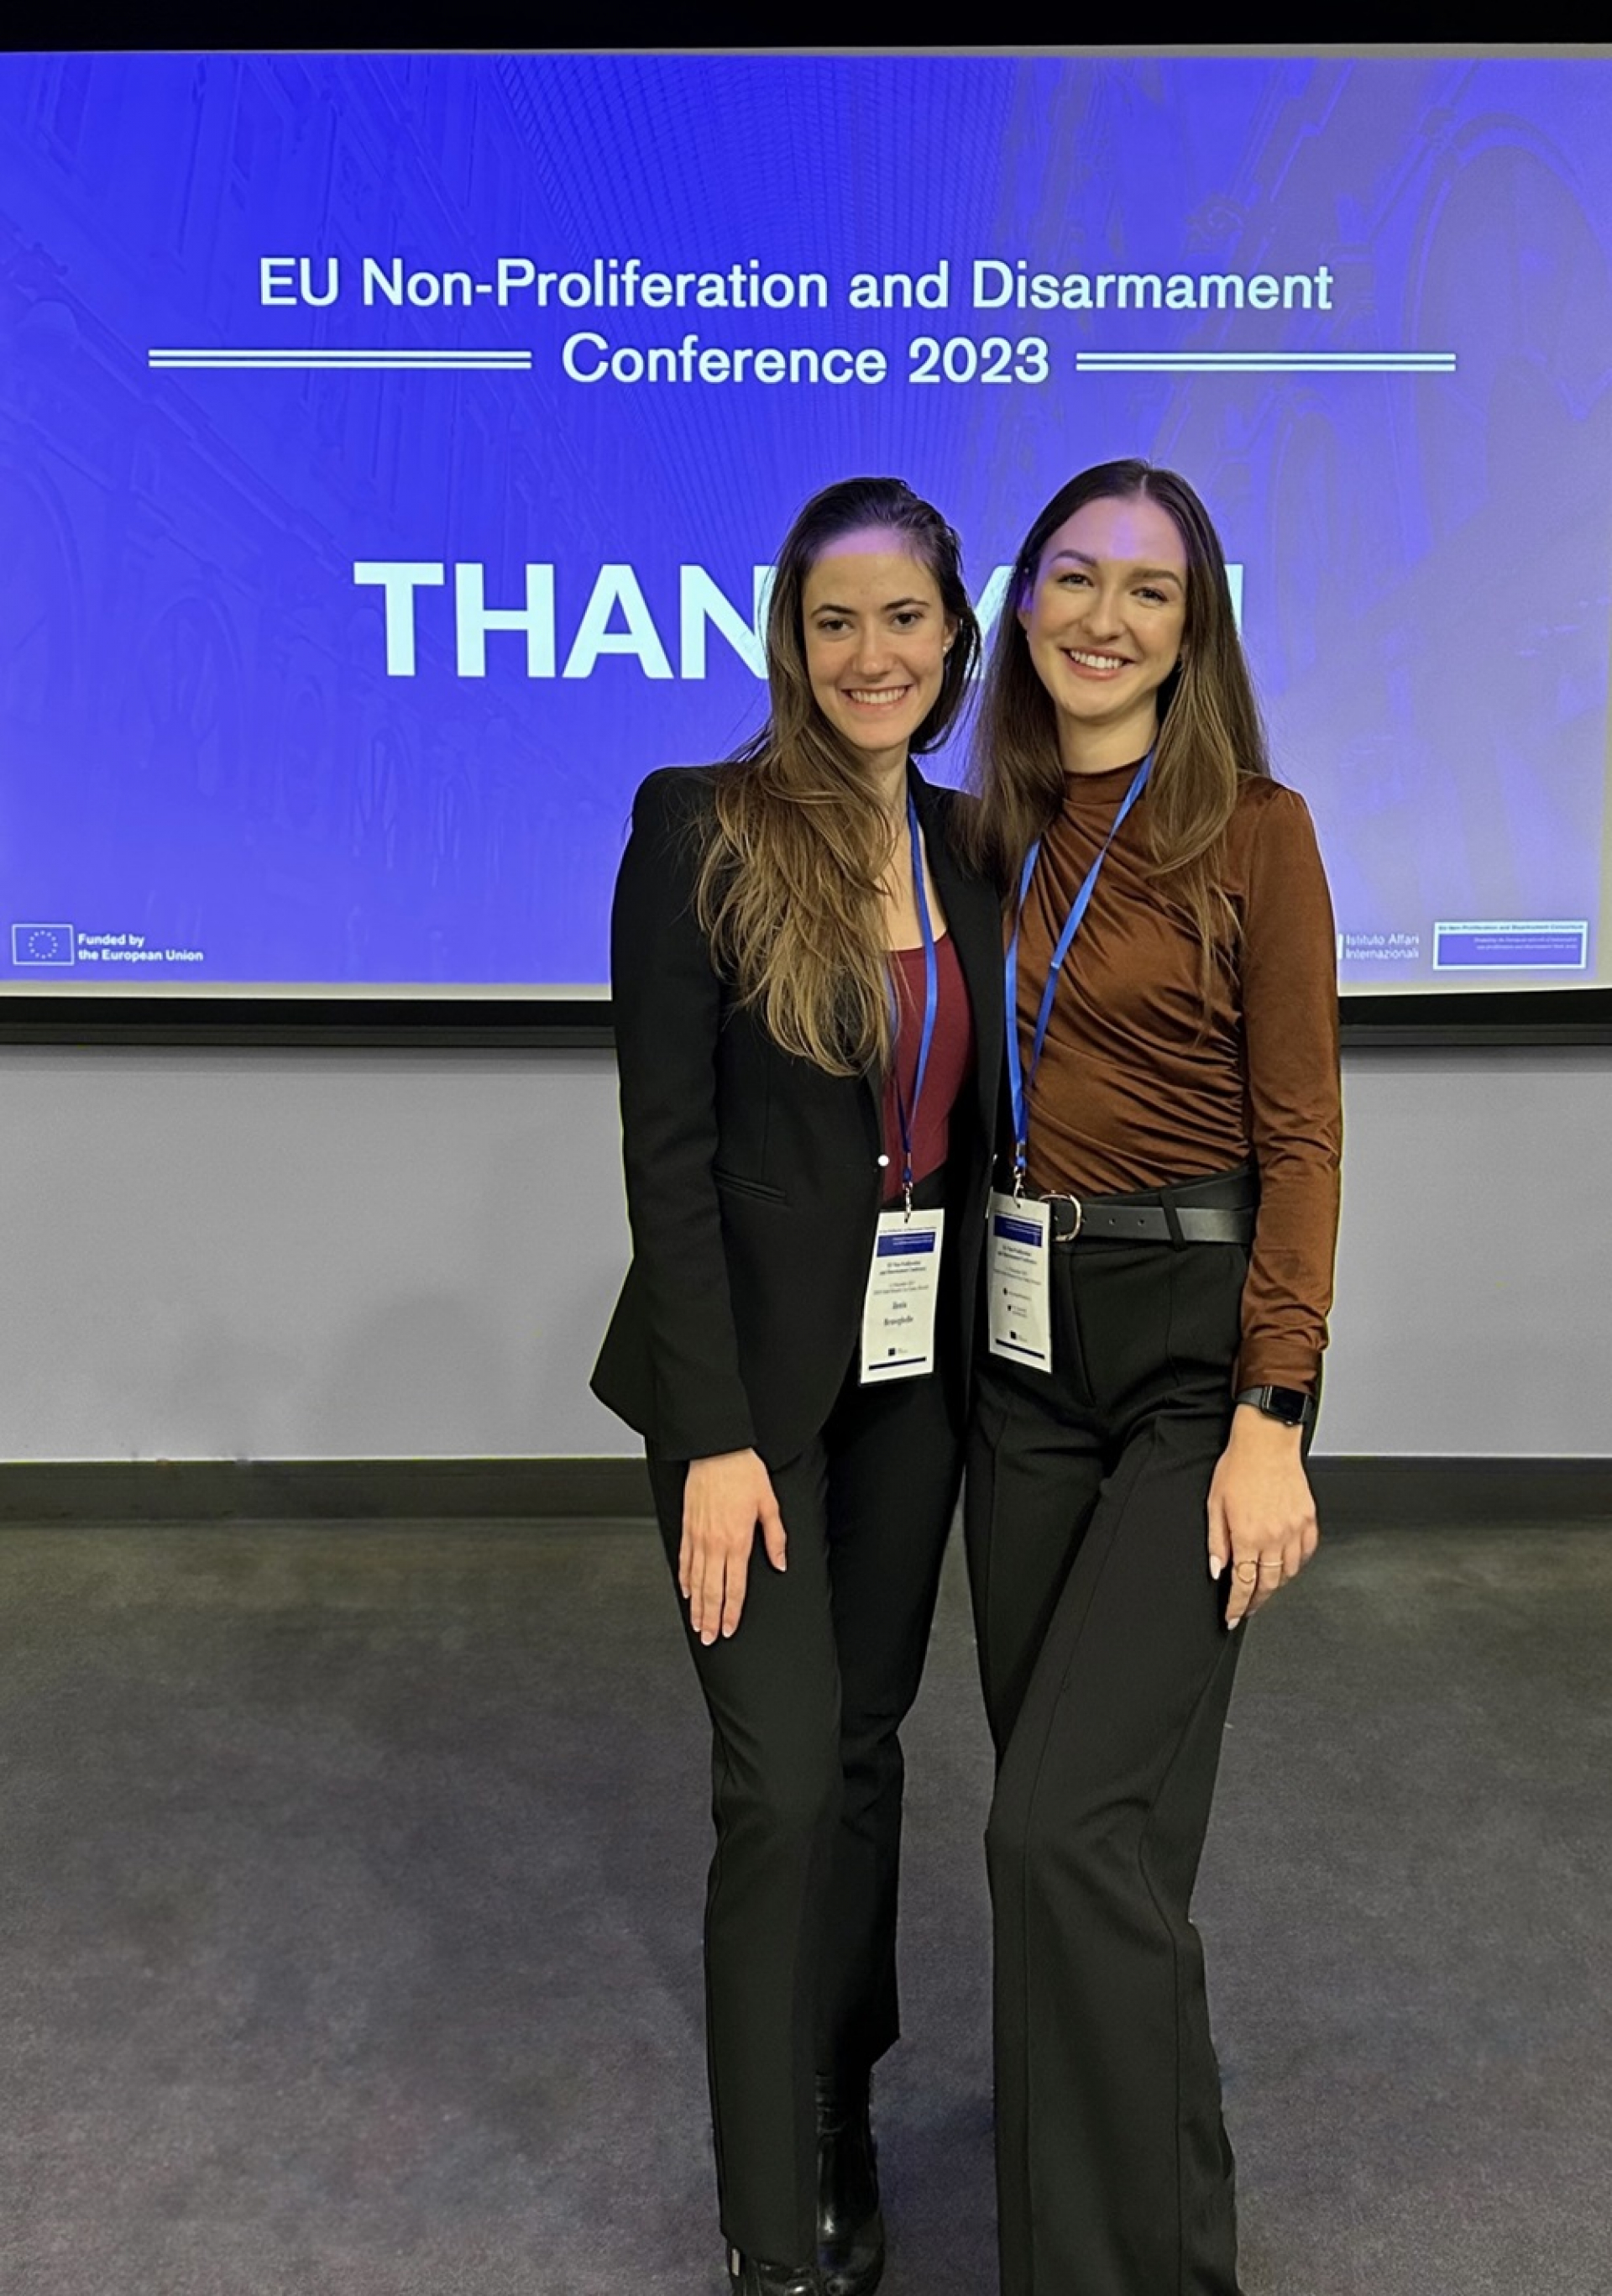 PSSI’s Space Security Team Project Coordinator Kristina Sikoraiova and Intern Ilenia Bruseghello attended the EU Non-Proliferation and Disarmament Conference in Brussels